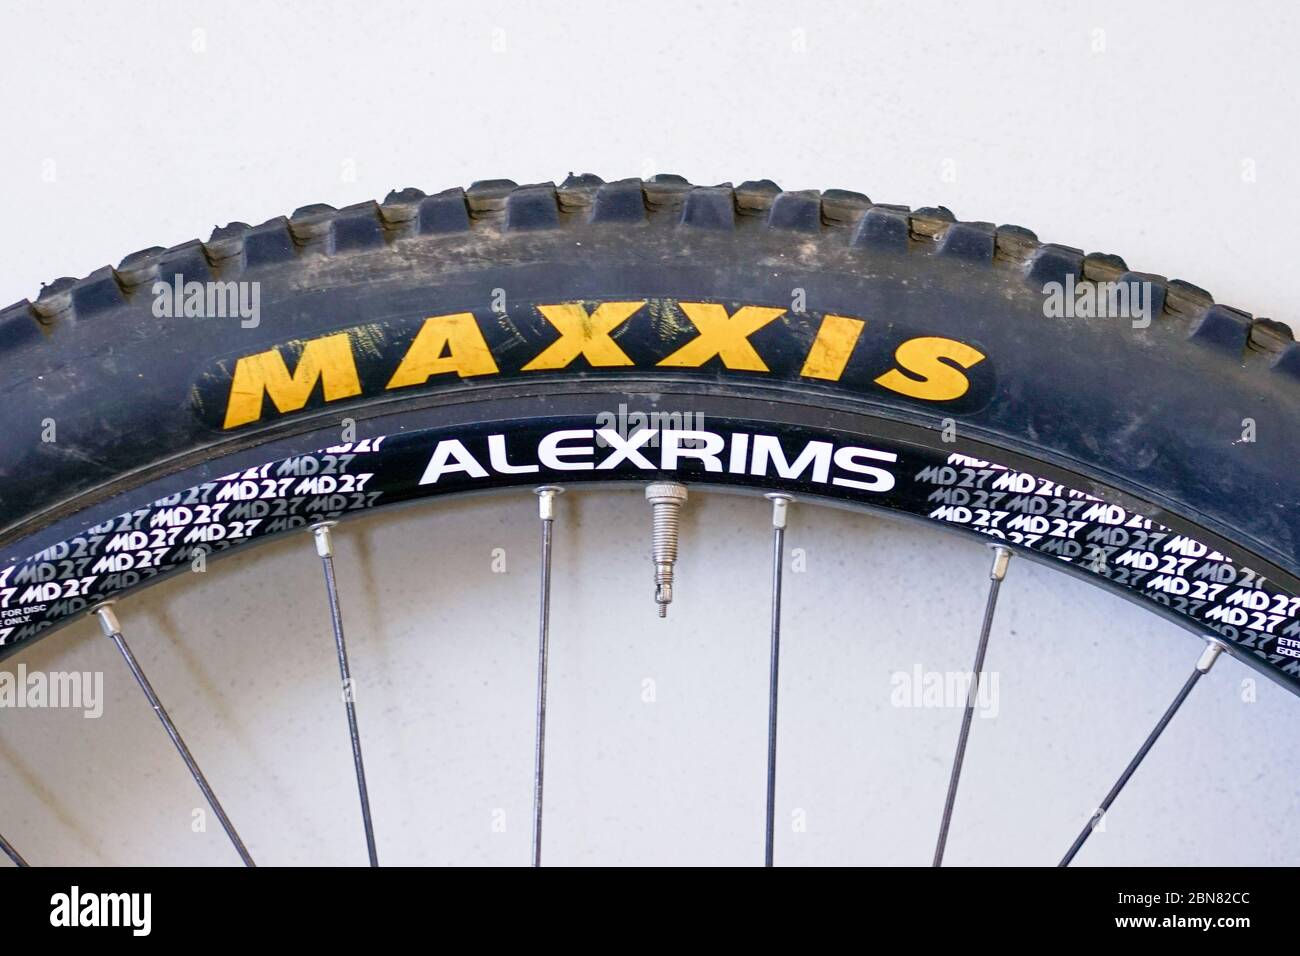 STANWELL TOPS, AUSTRALIA - Nov 11, 2019: Alexrims with Maxxis tyre used mountain bike Stock Photo